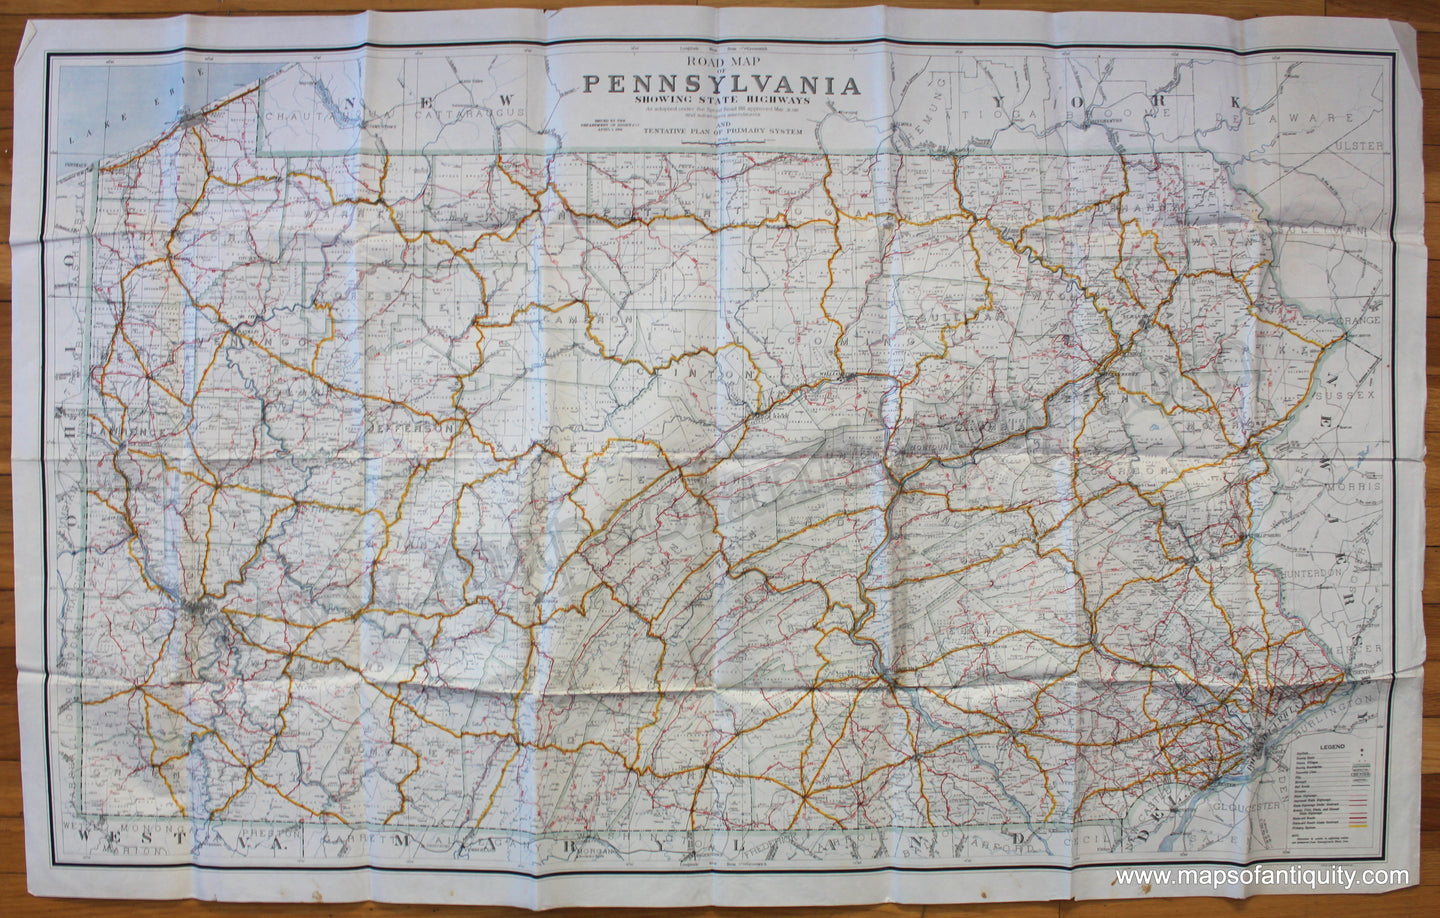 Antique-Printed-Color-Map-Road-Map-of-Pennsylvania-showing-State-Highways-1924-Dept-of-Highways-Mid-Atlantic-Pennsylvania-1800s-19th-century-Maps-of-Antiquity